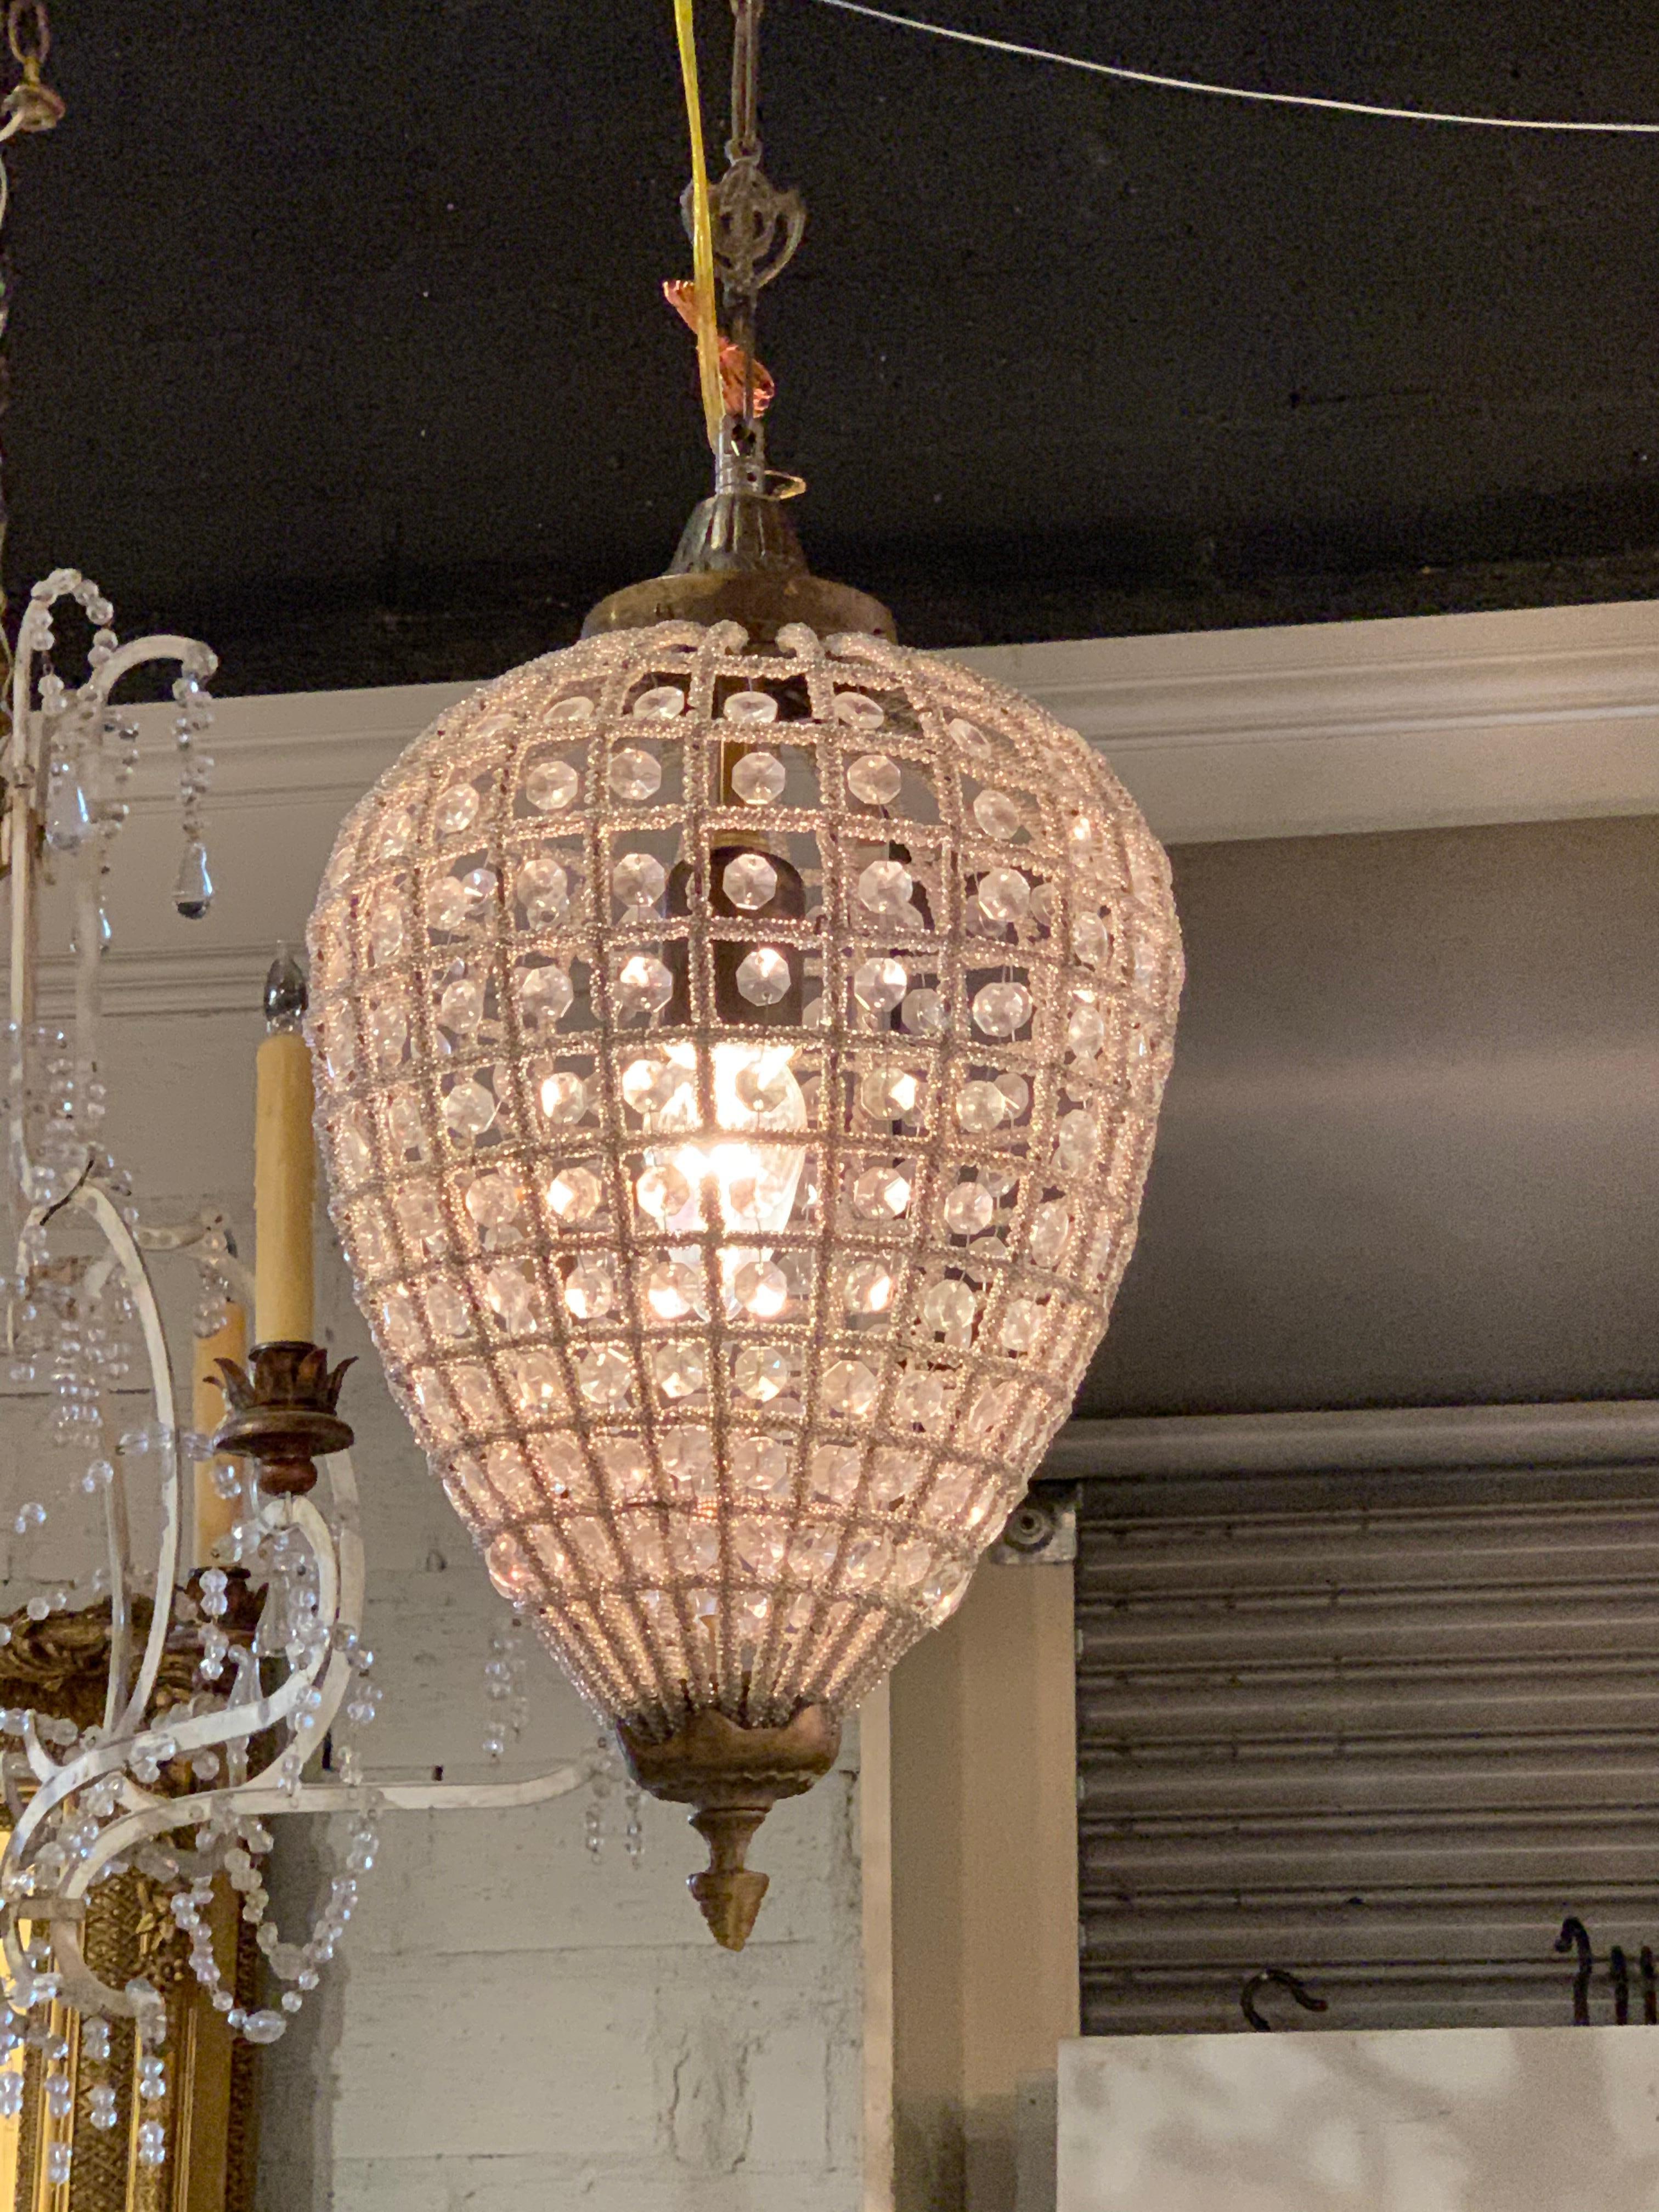 Exquisite modern French style beaded pendant lights. These glisten with an abundance of beautiful beads. There are two available. Price listed is per item.
So pretty!